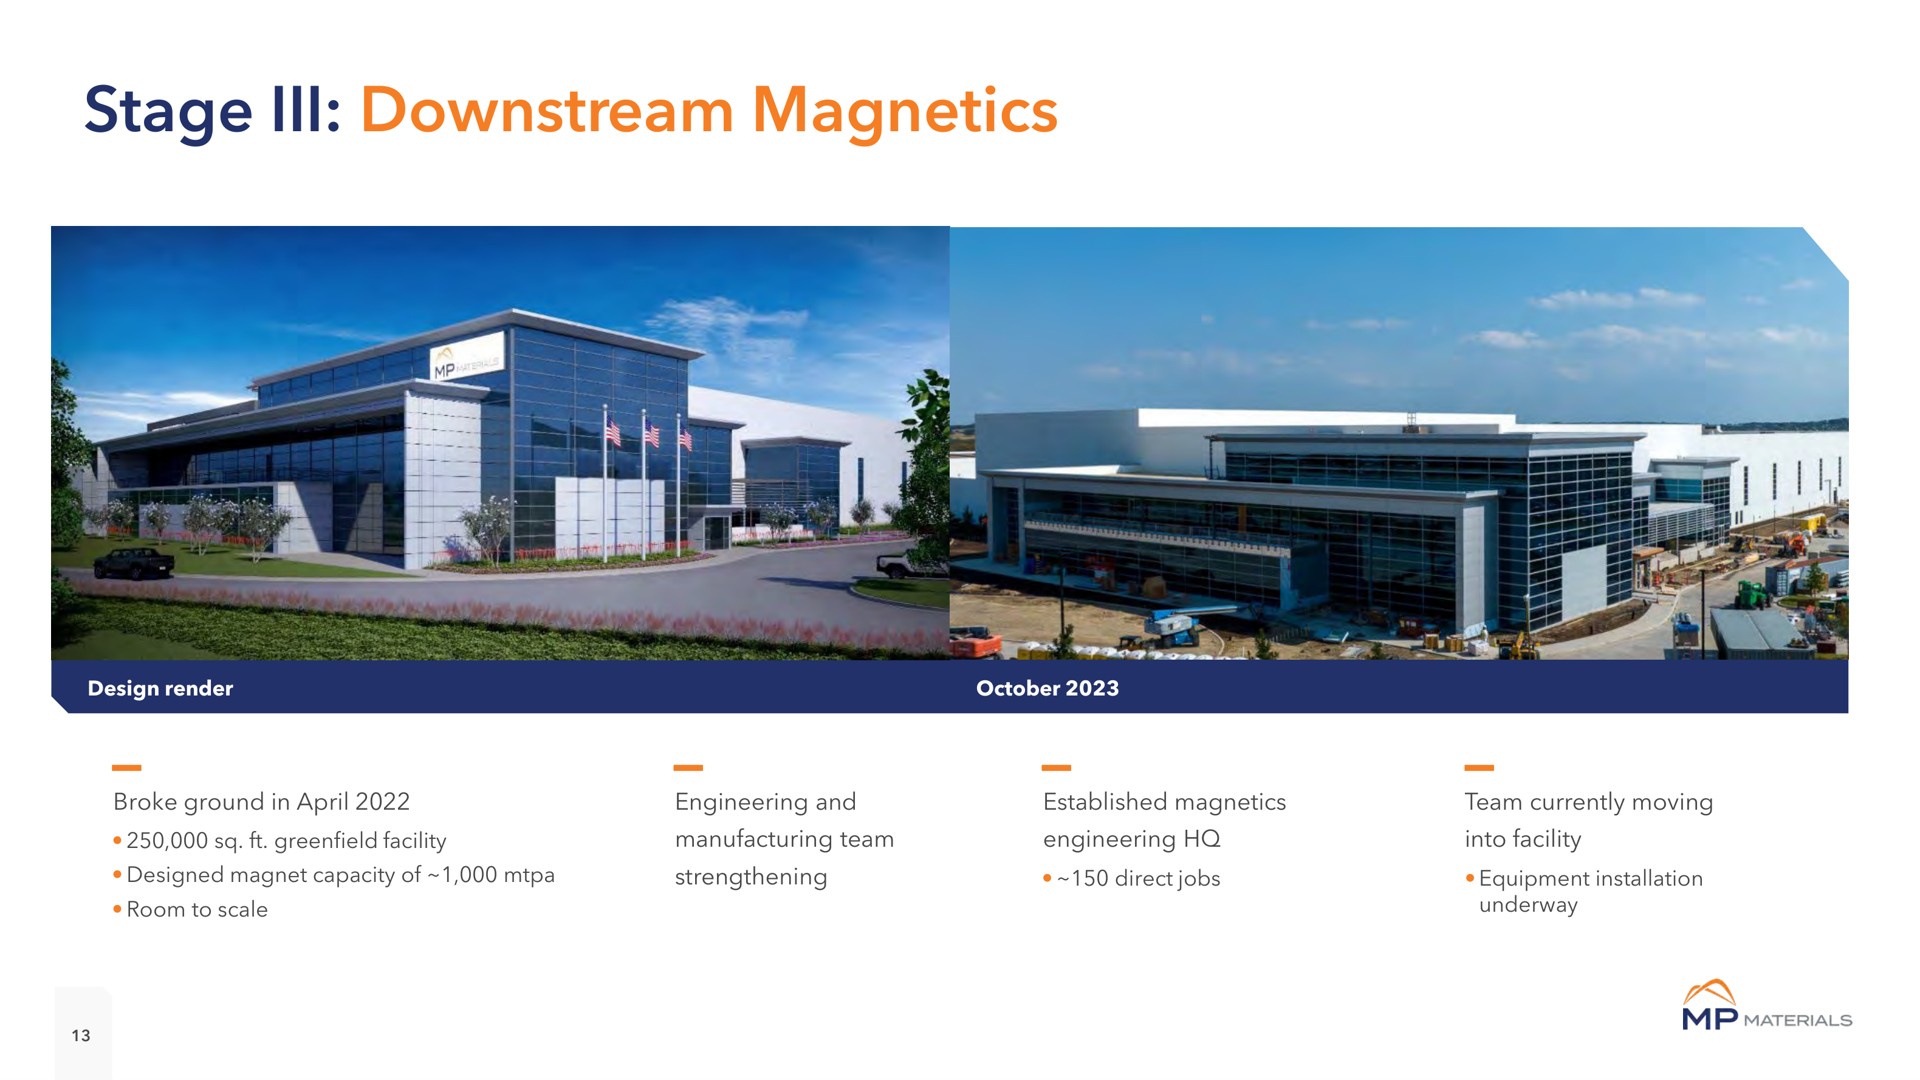 stage downstream magnetics ill | MP Materials